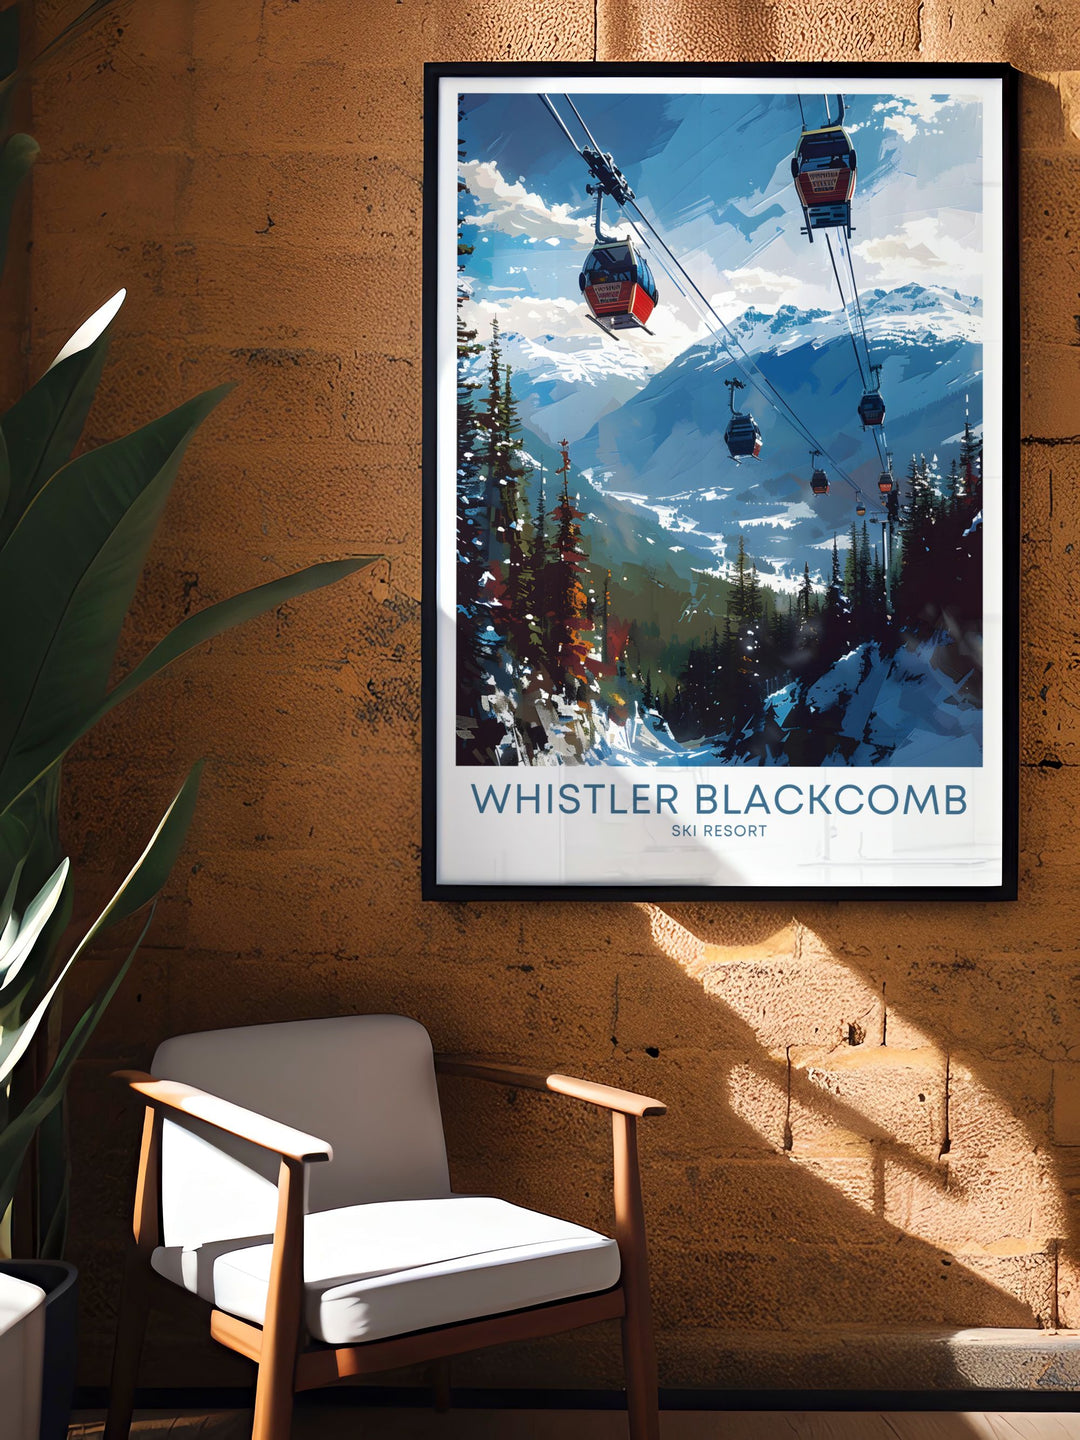 Peak 2 Peak Gondola artwork capturing the stunning views and vibrant energy of Whistler Canada. Ideal for ski and snowboard lovers, this Whistler print is a must have for anyone looking to elevate their home decor with unique and meaningful art.